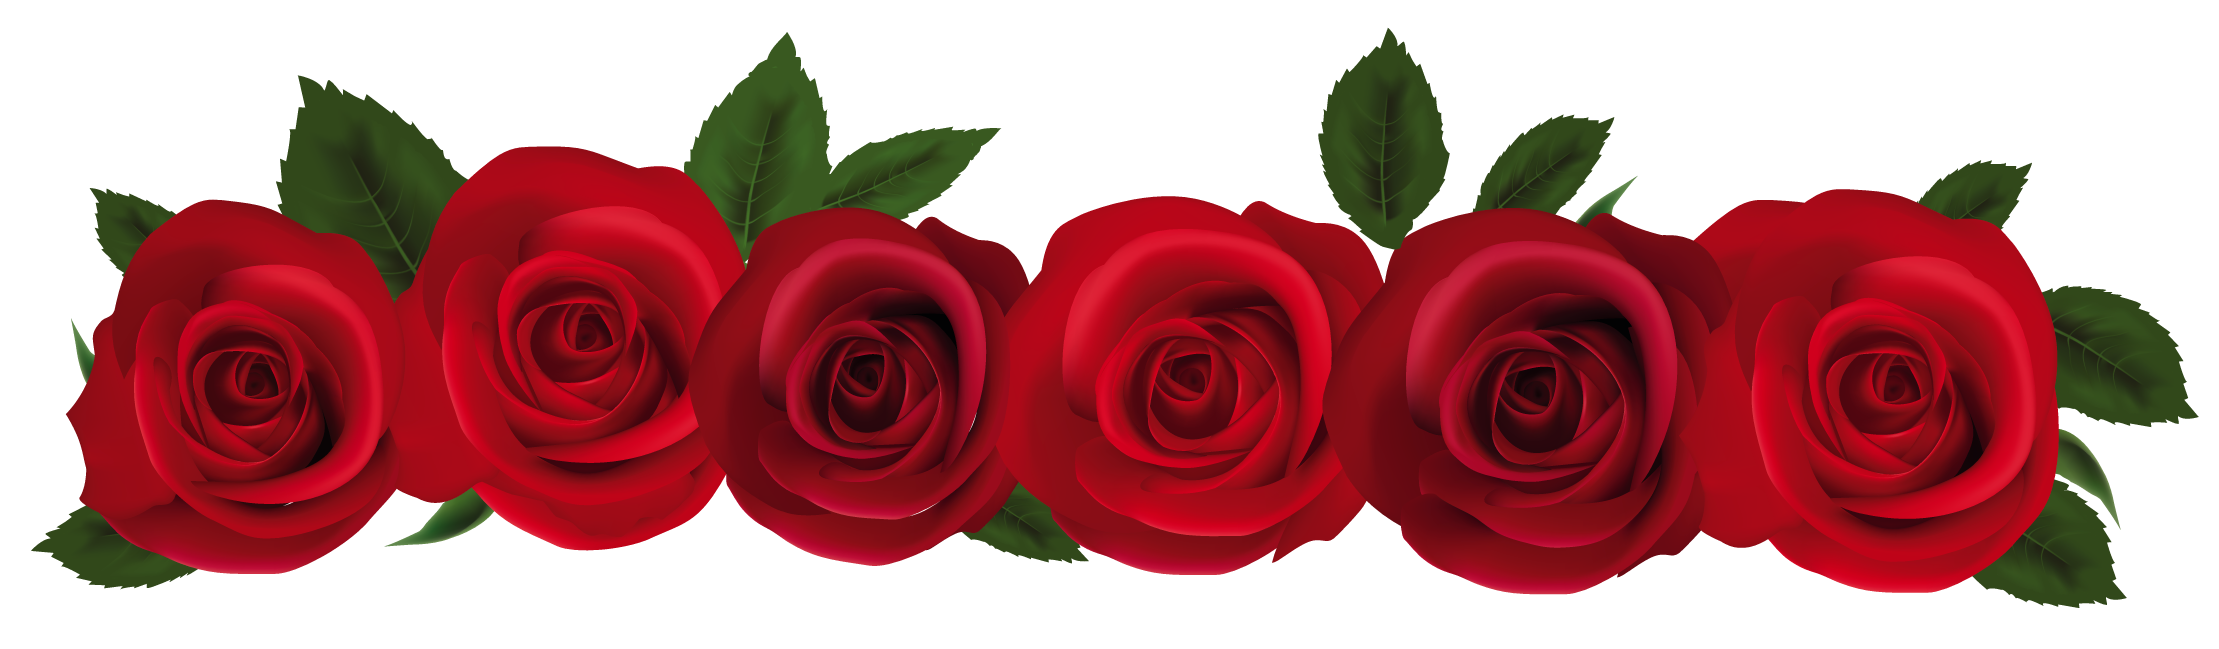 Rose Border Clip Art Png | Clipart library - Free Clipart Images